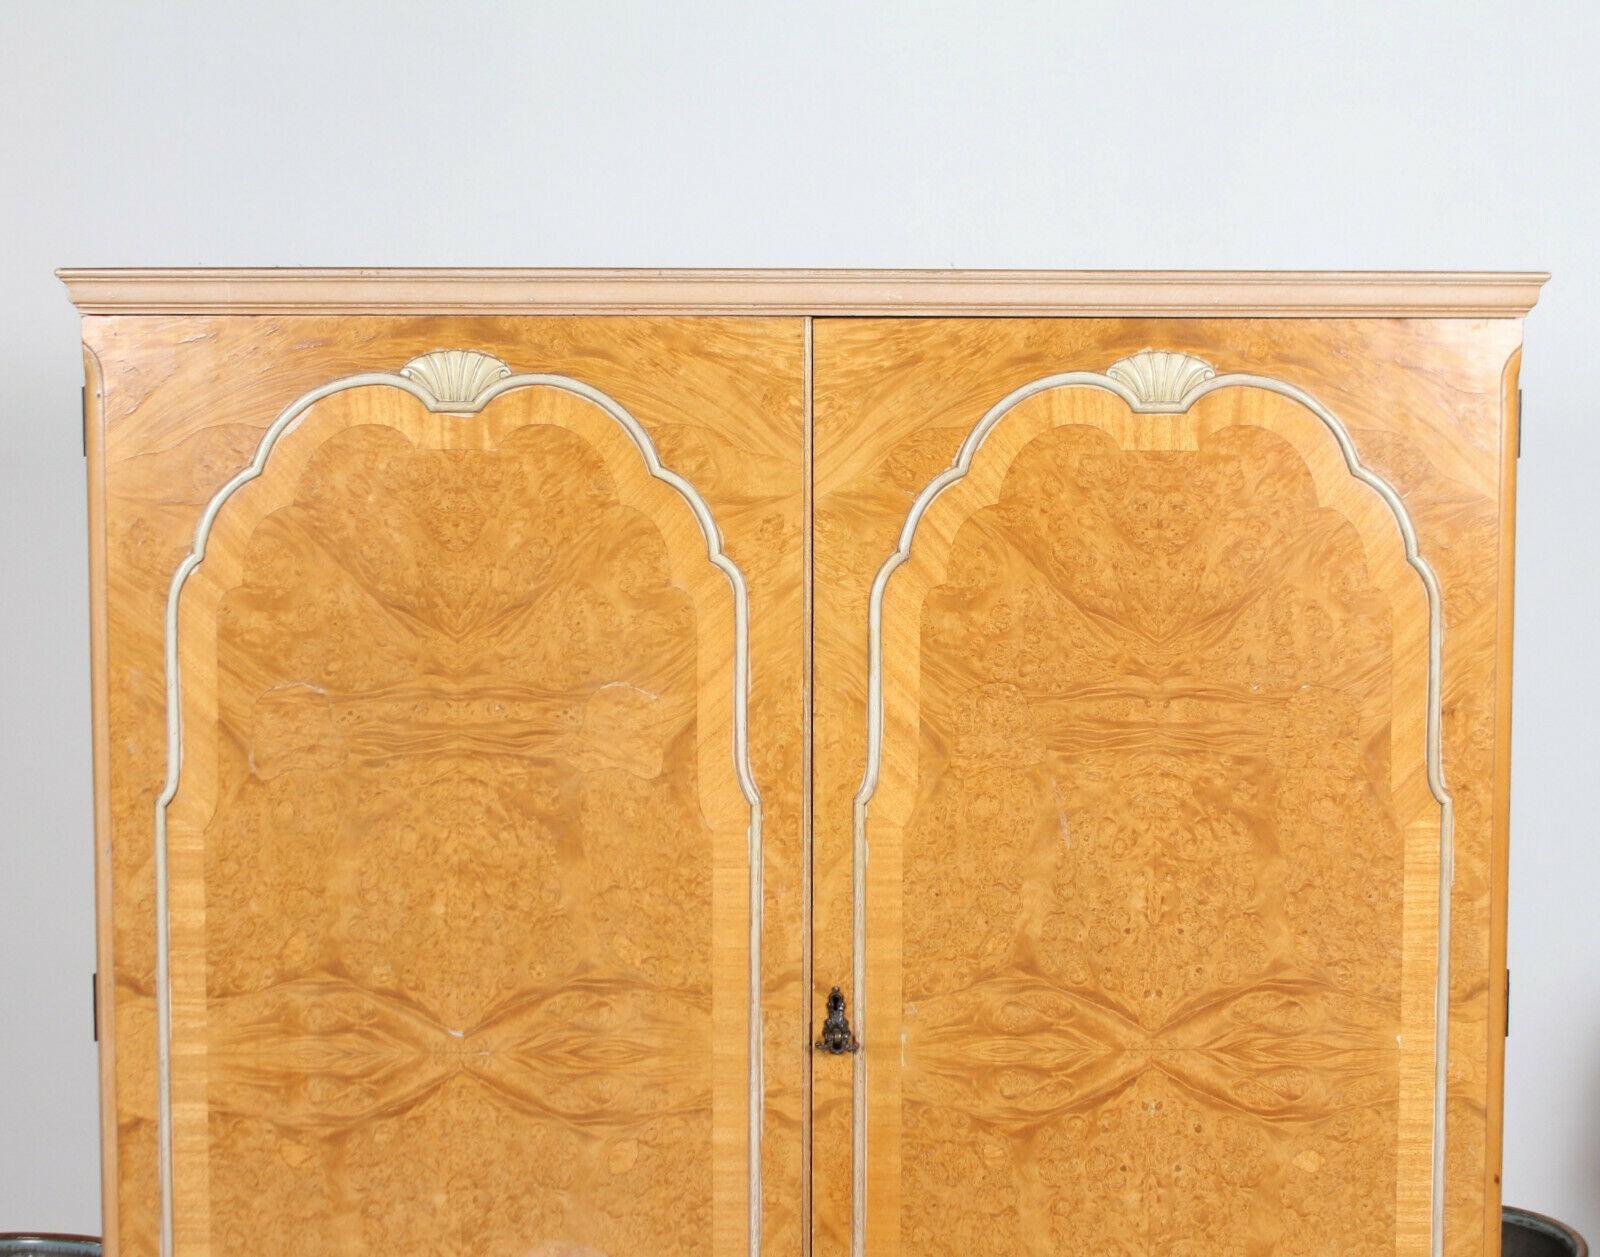 An impressive bird's-eye maple wardrobe.

The top with shaped edges above bead paneled doors enclosed hanging rails, shelving and full length mirror. Raised on carved squat cabriole legs.